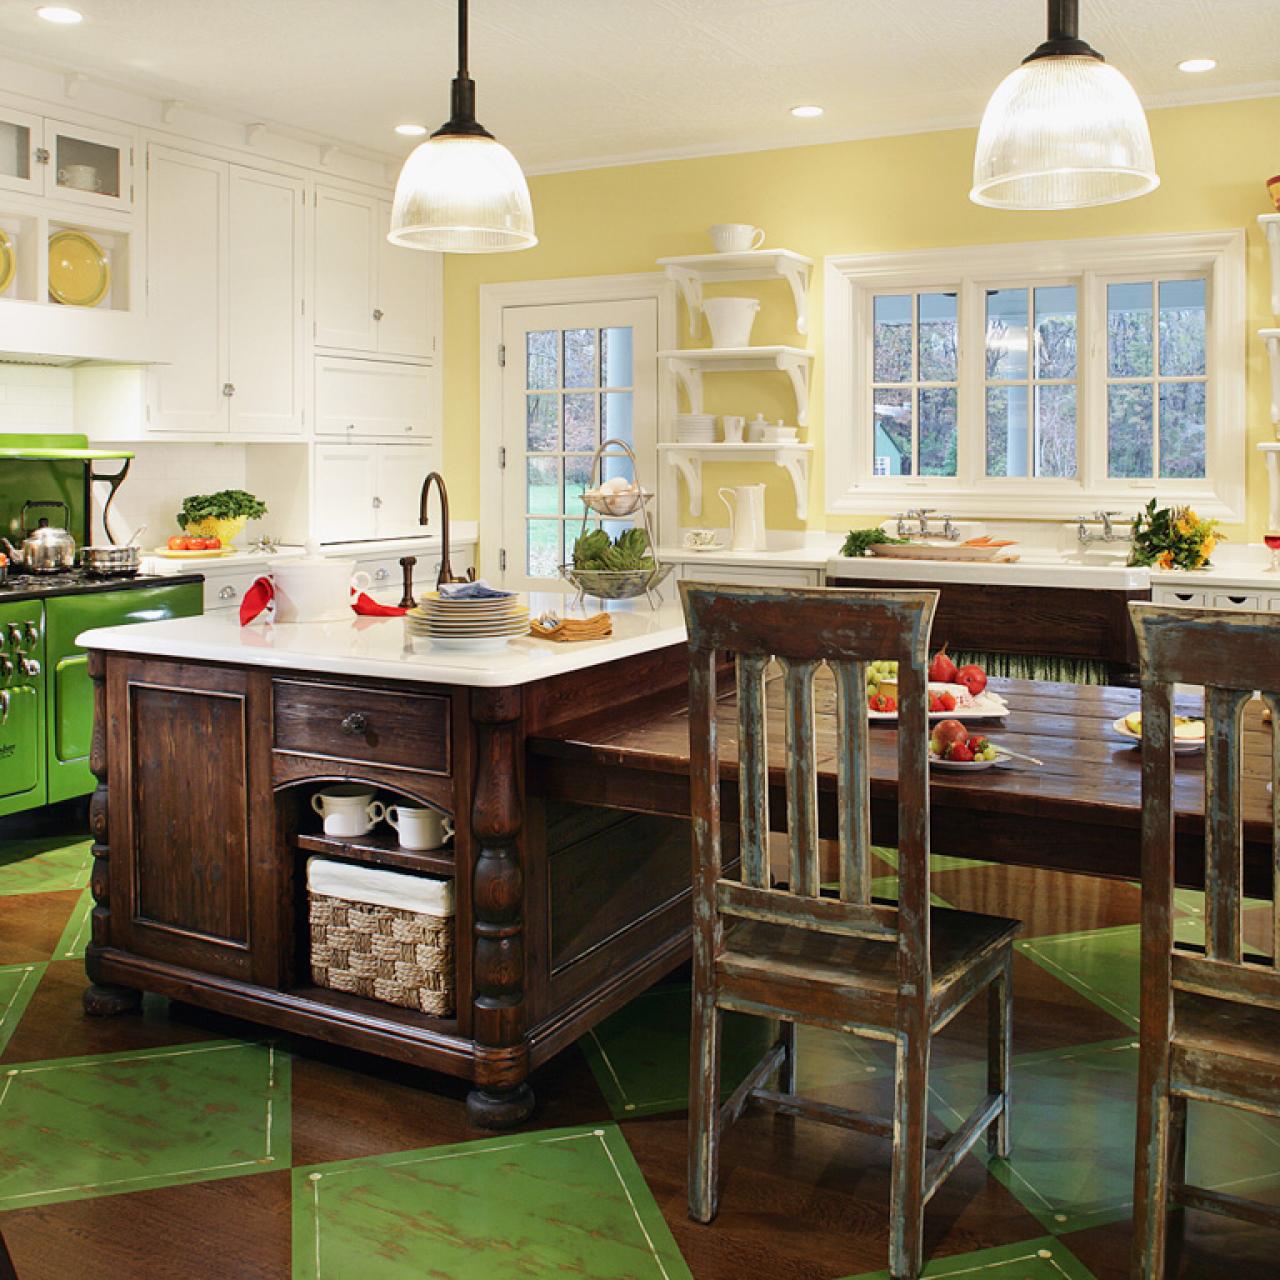 Painting Kitchen Floors: Pictures, Ideas & Tips From HGTV